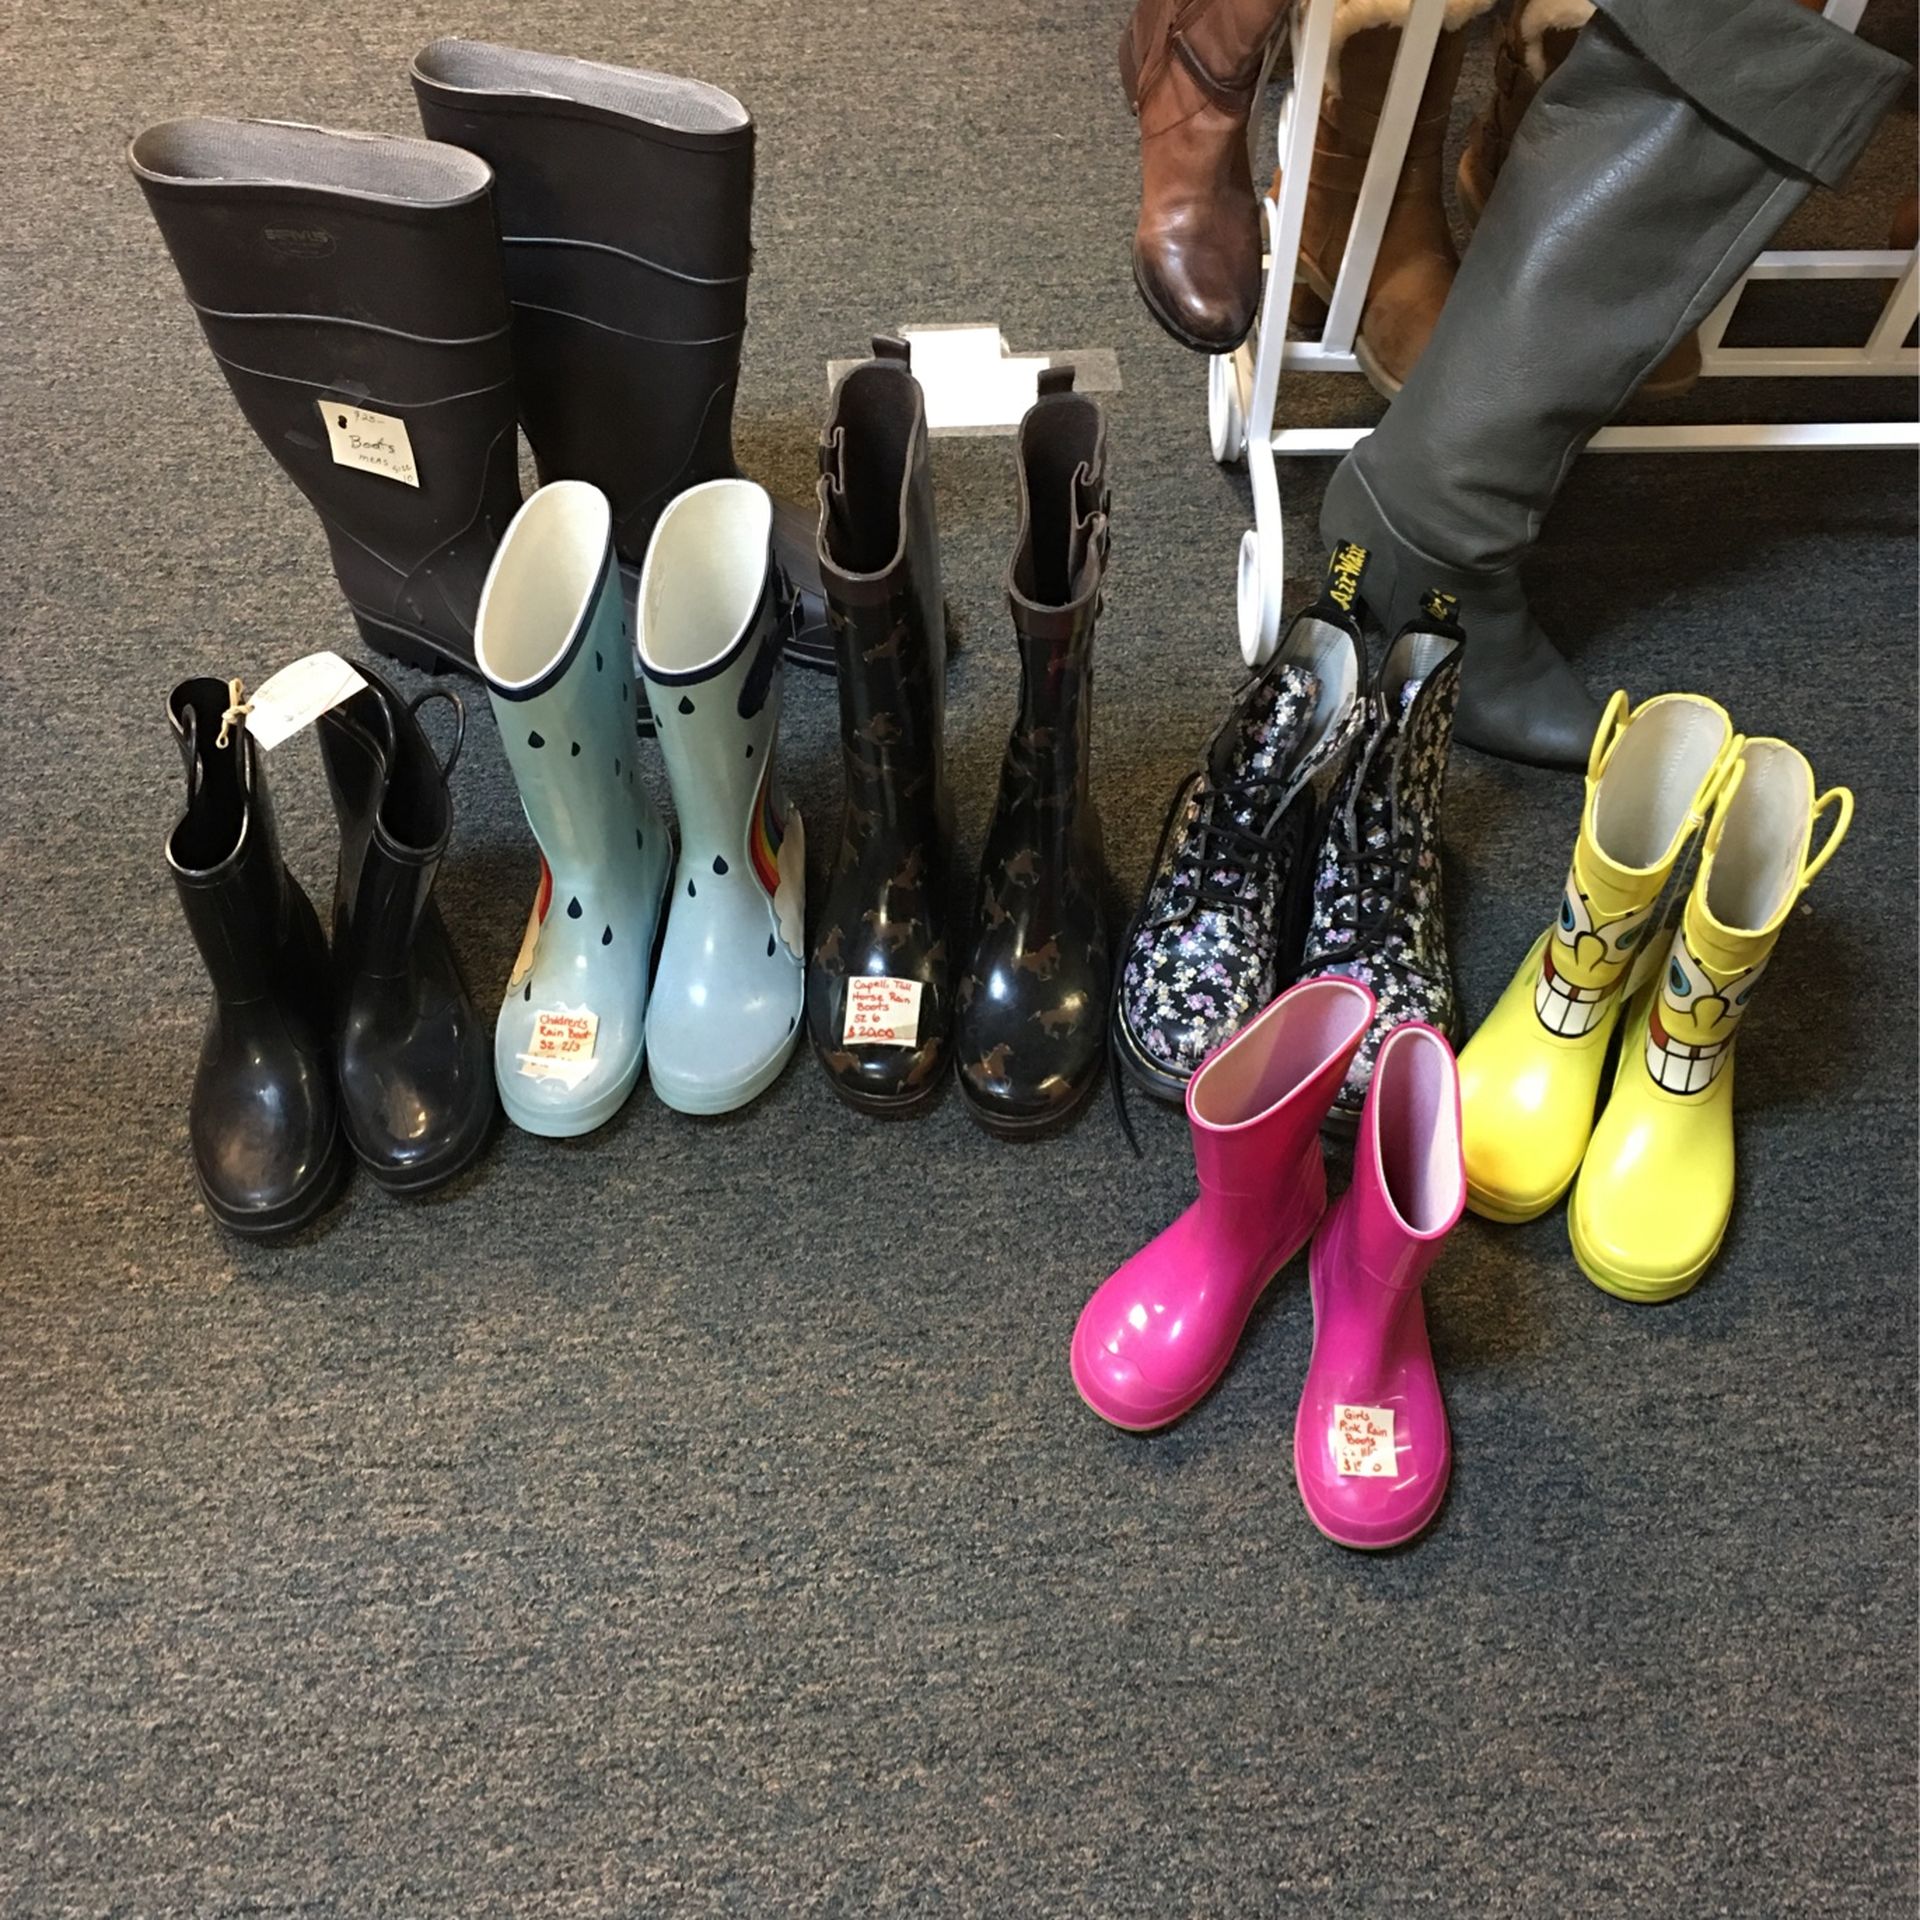 Rain boots, snow boots, Assortment of colors styles sizes and prices starting @ $15